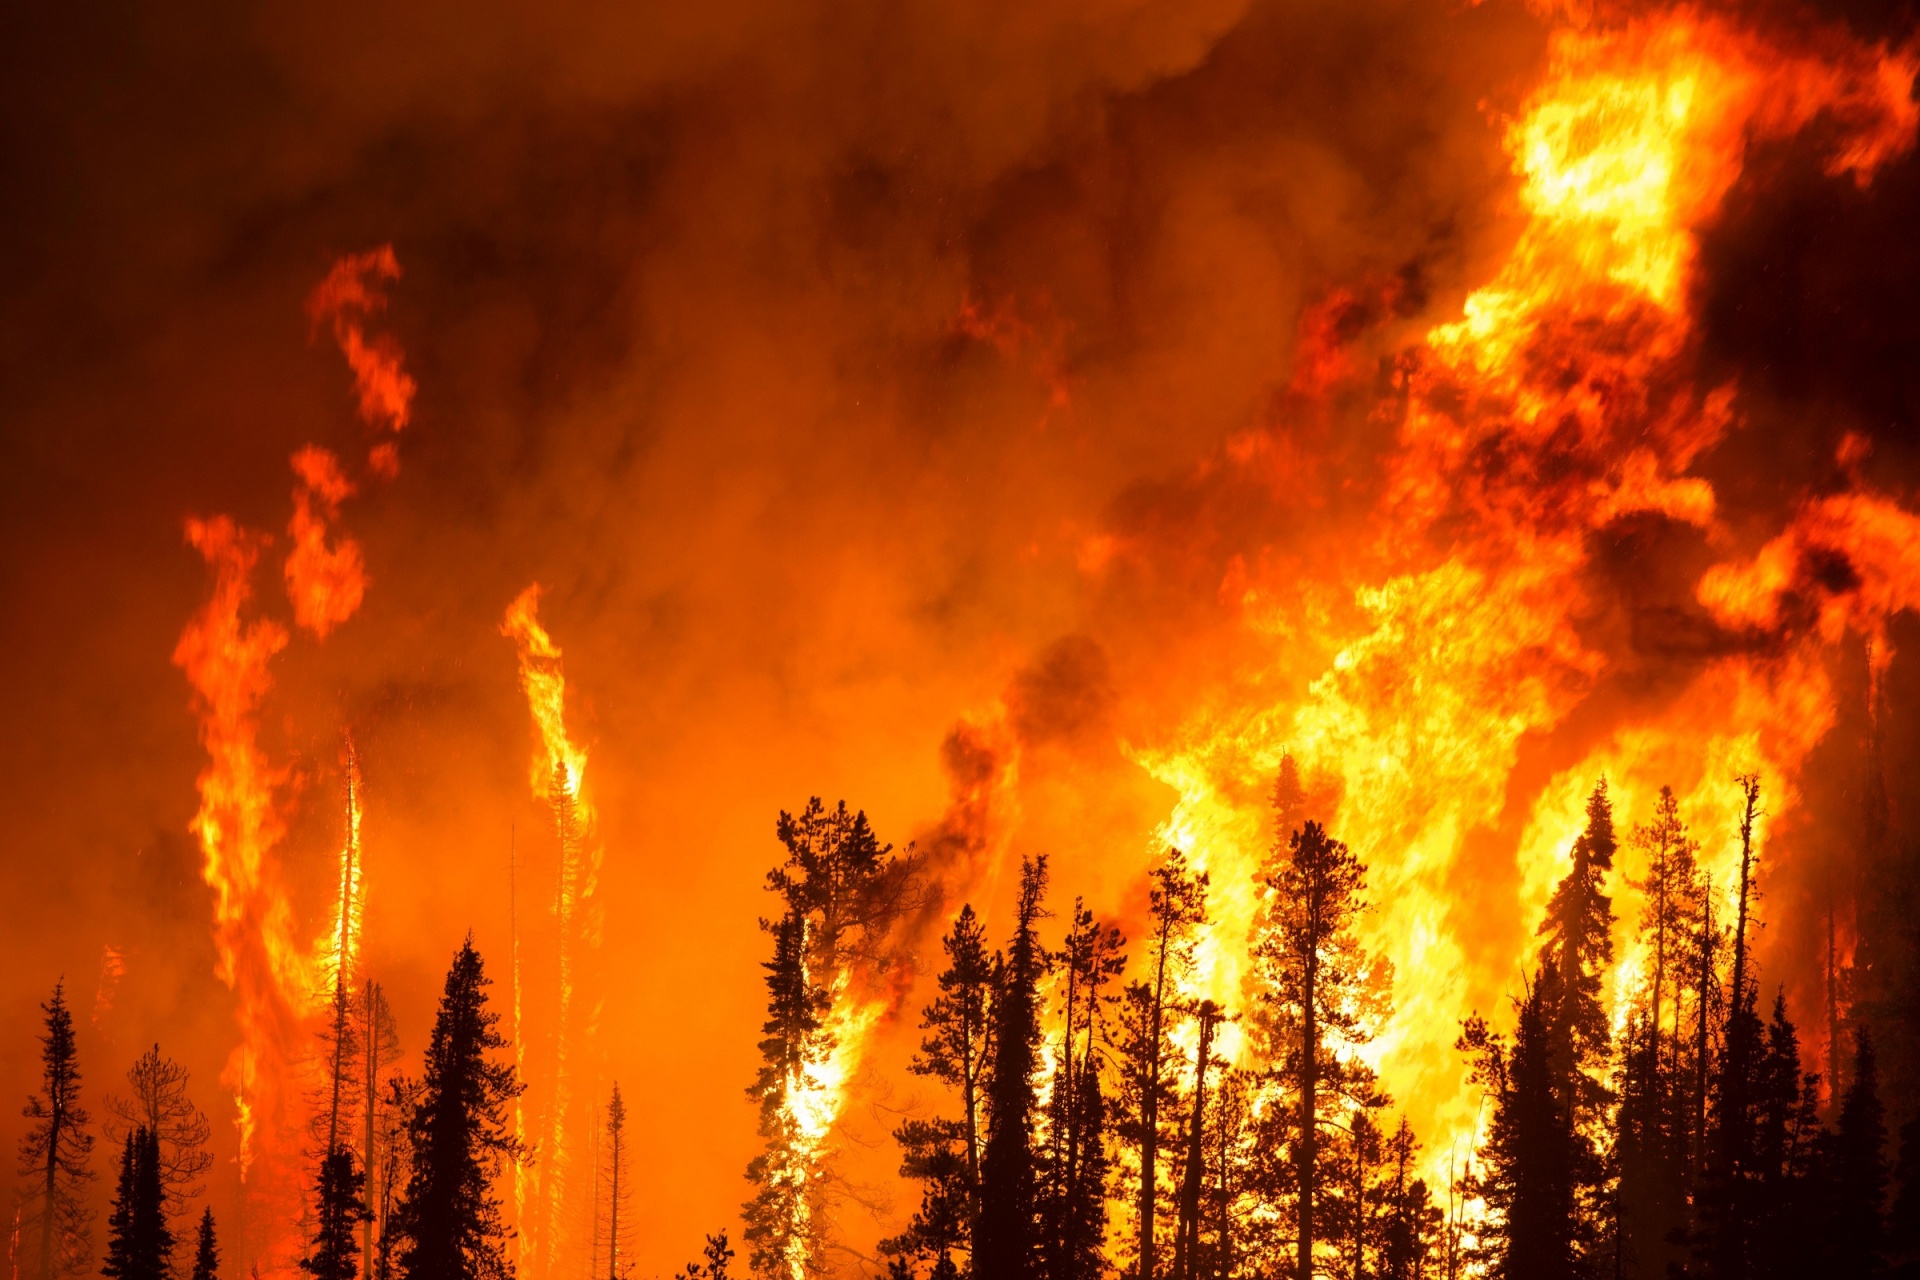 Forest Fire. Credit: from public domain